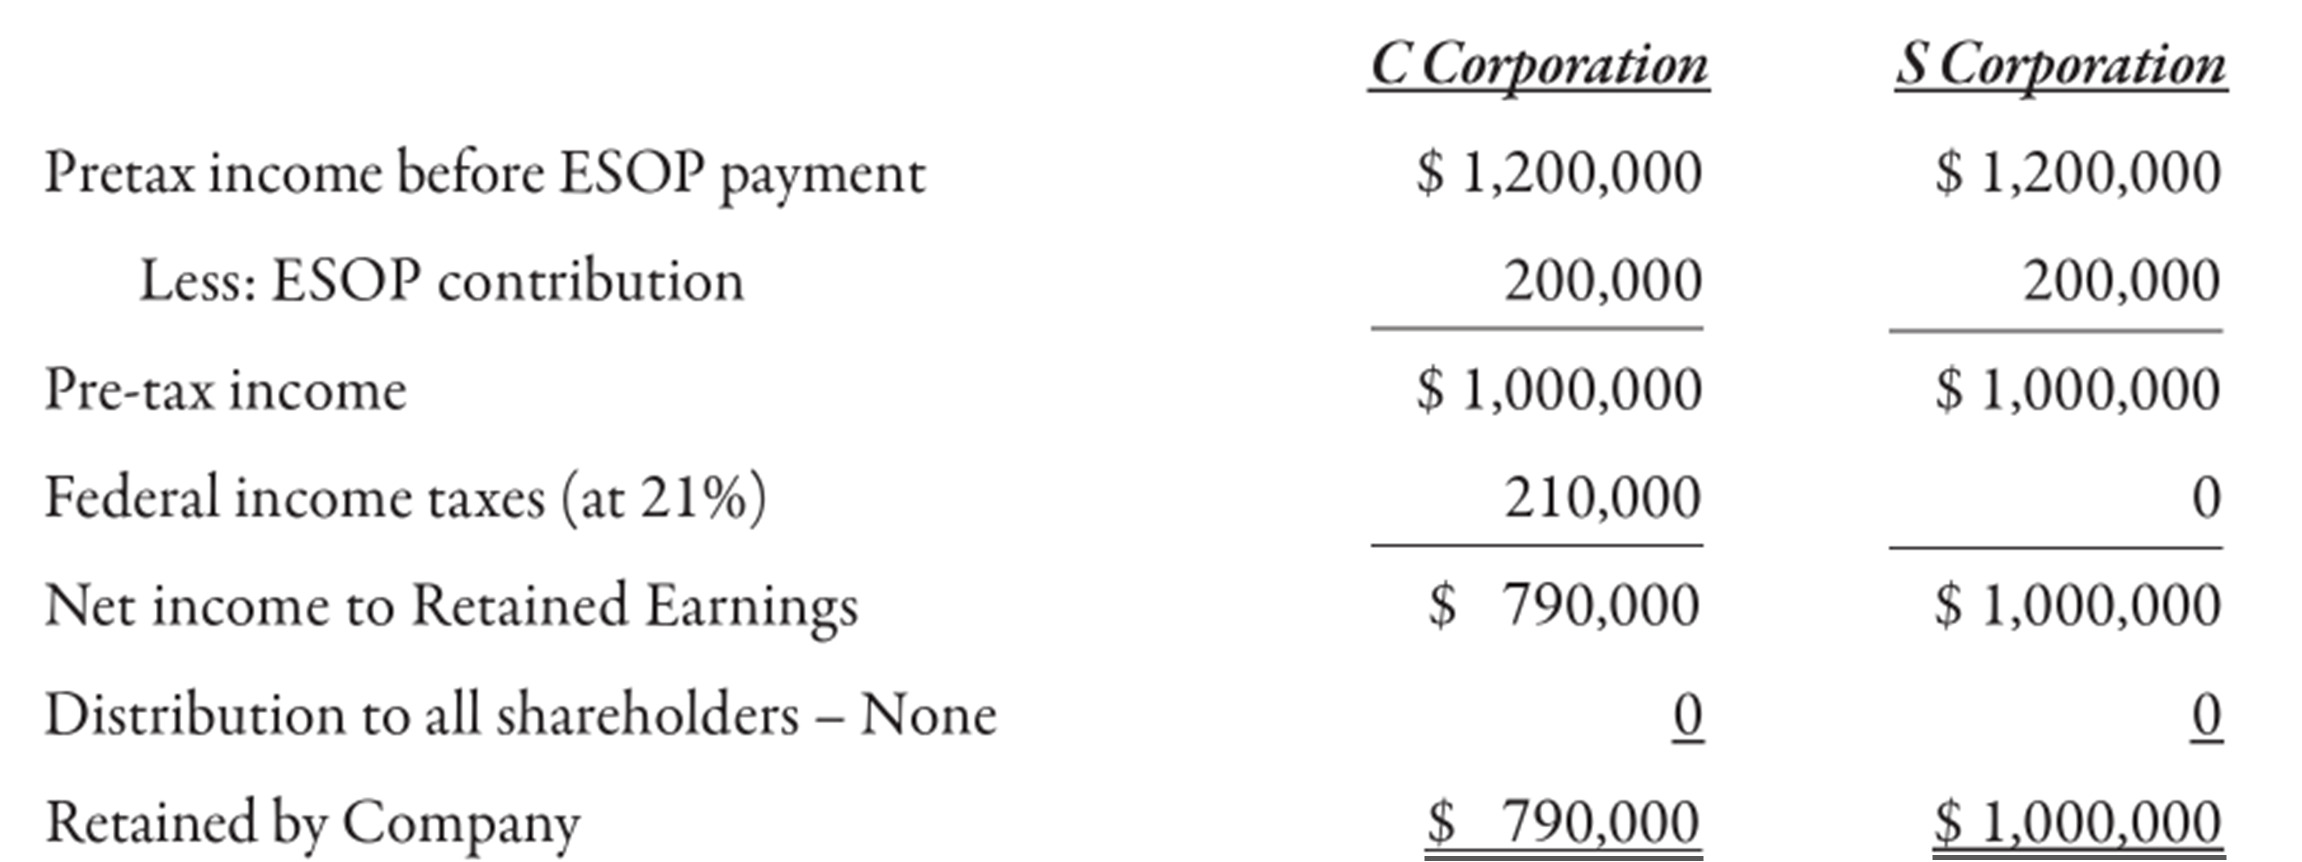 Comparison of the impact of exemption for taxes for an S corporation ESOP versus a C corporation ESOP